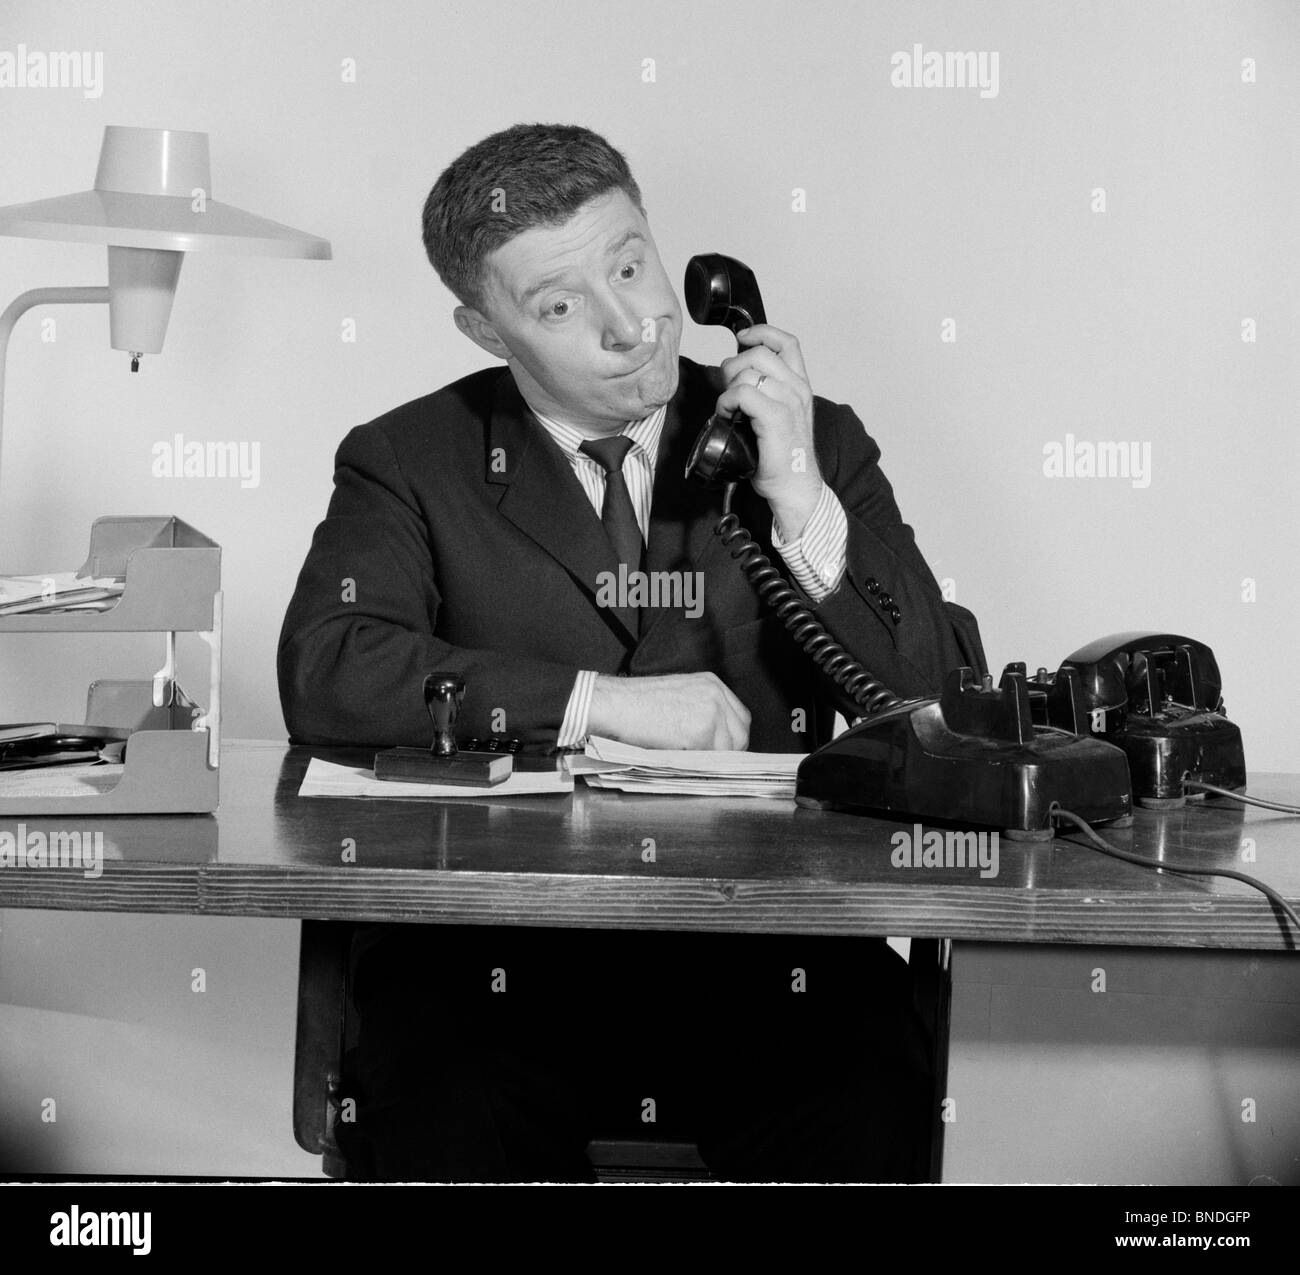 Businessman using a telephone in an office Stock Photo